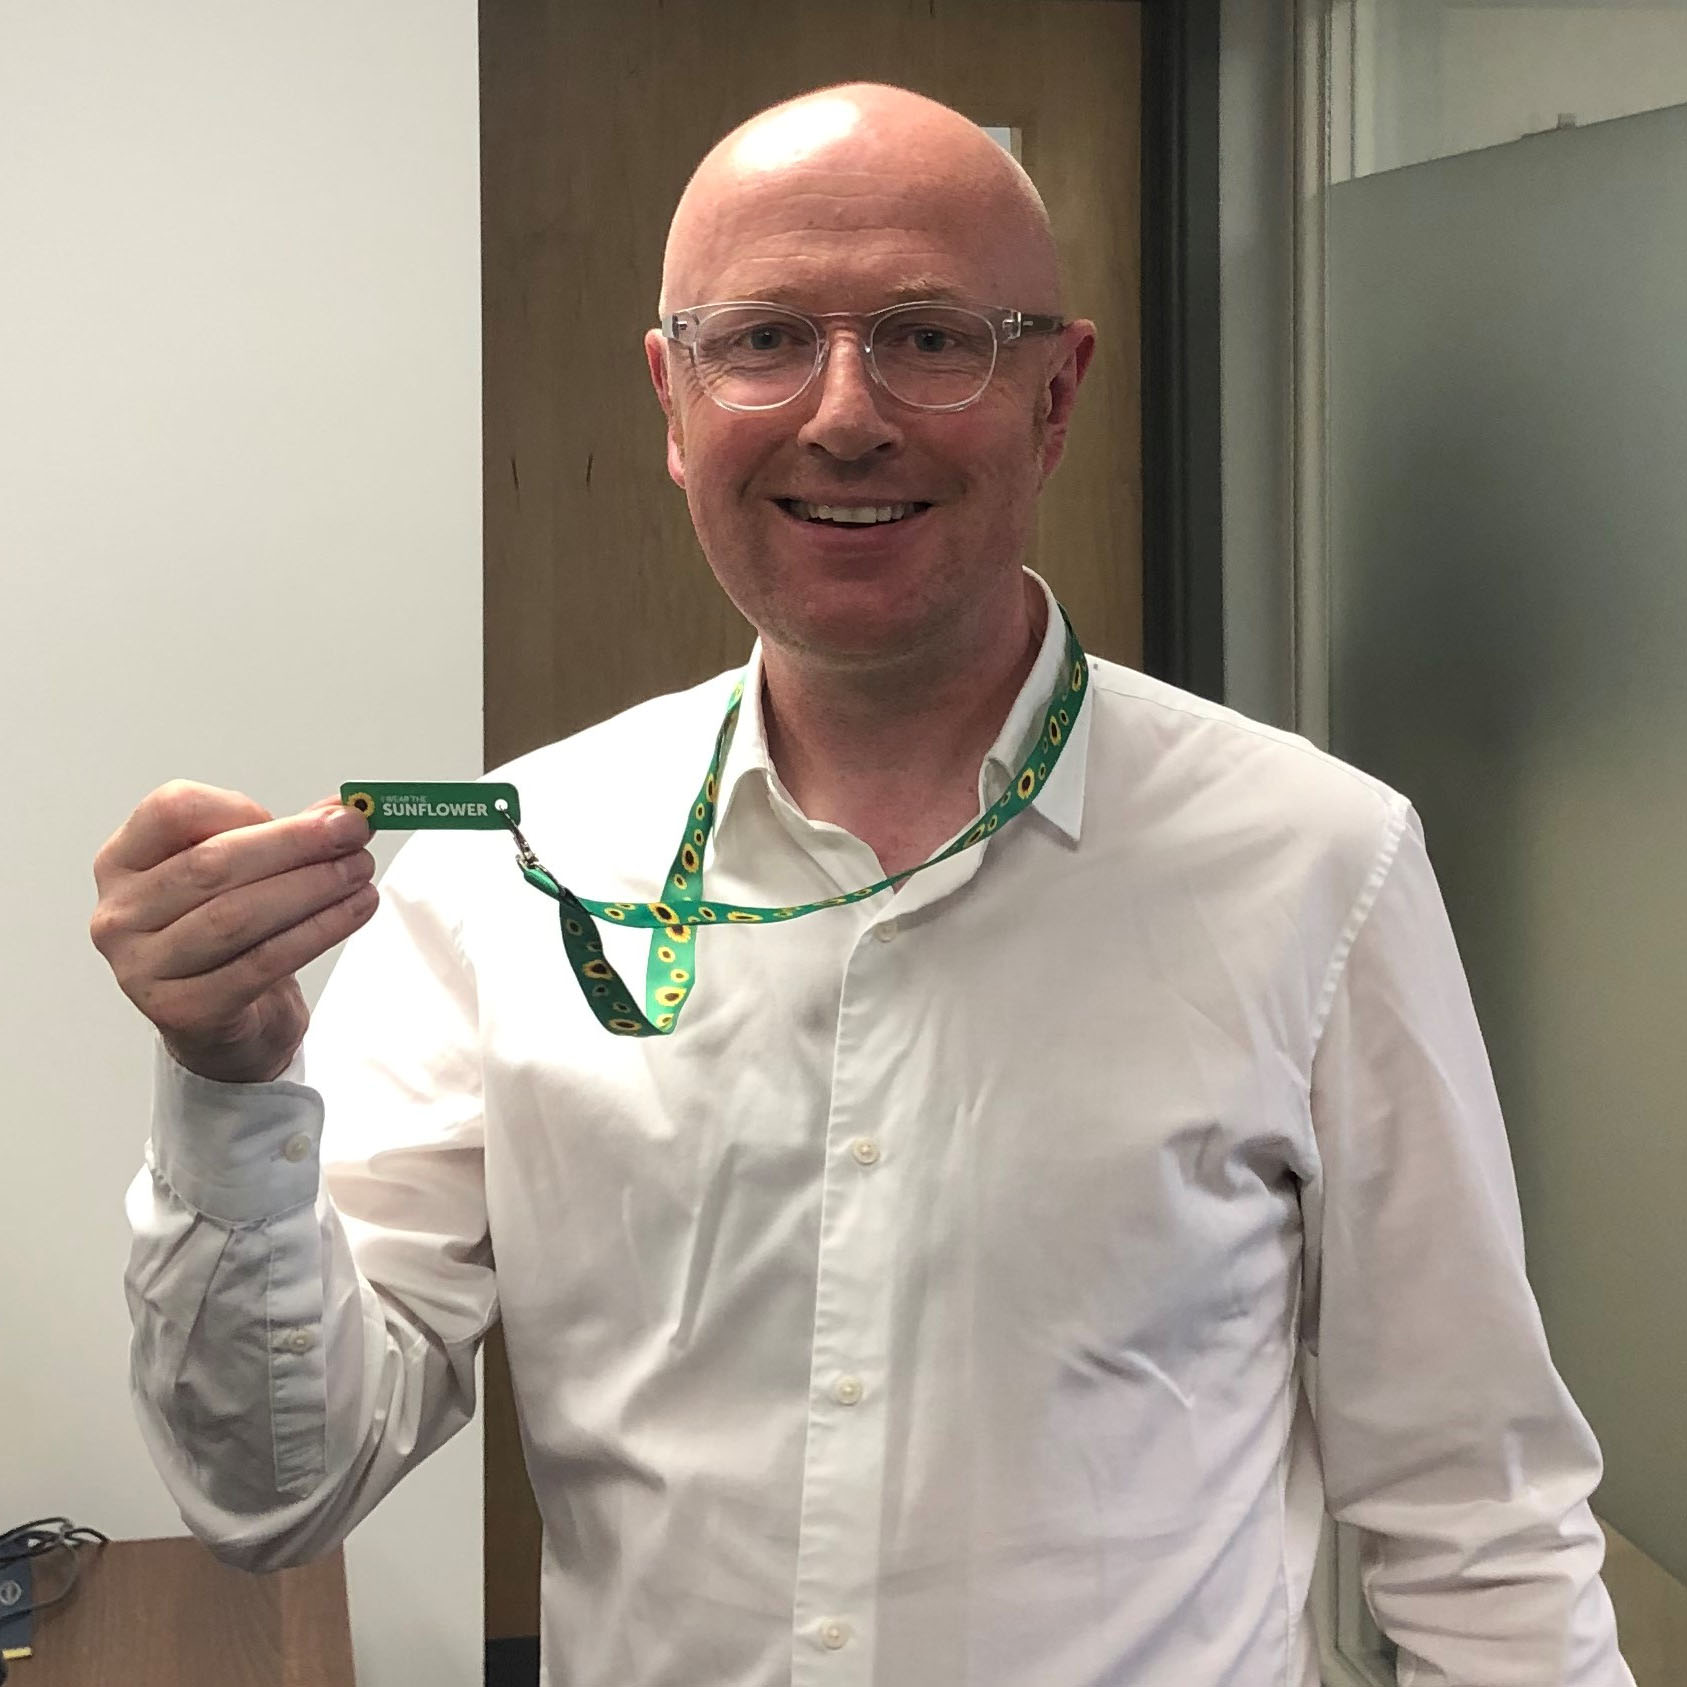 A member of staff showcasing the new 'sunflower' lanyard